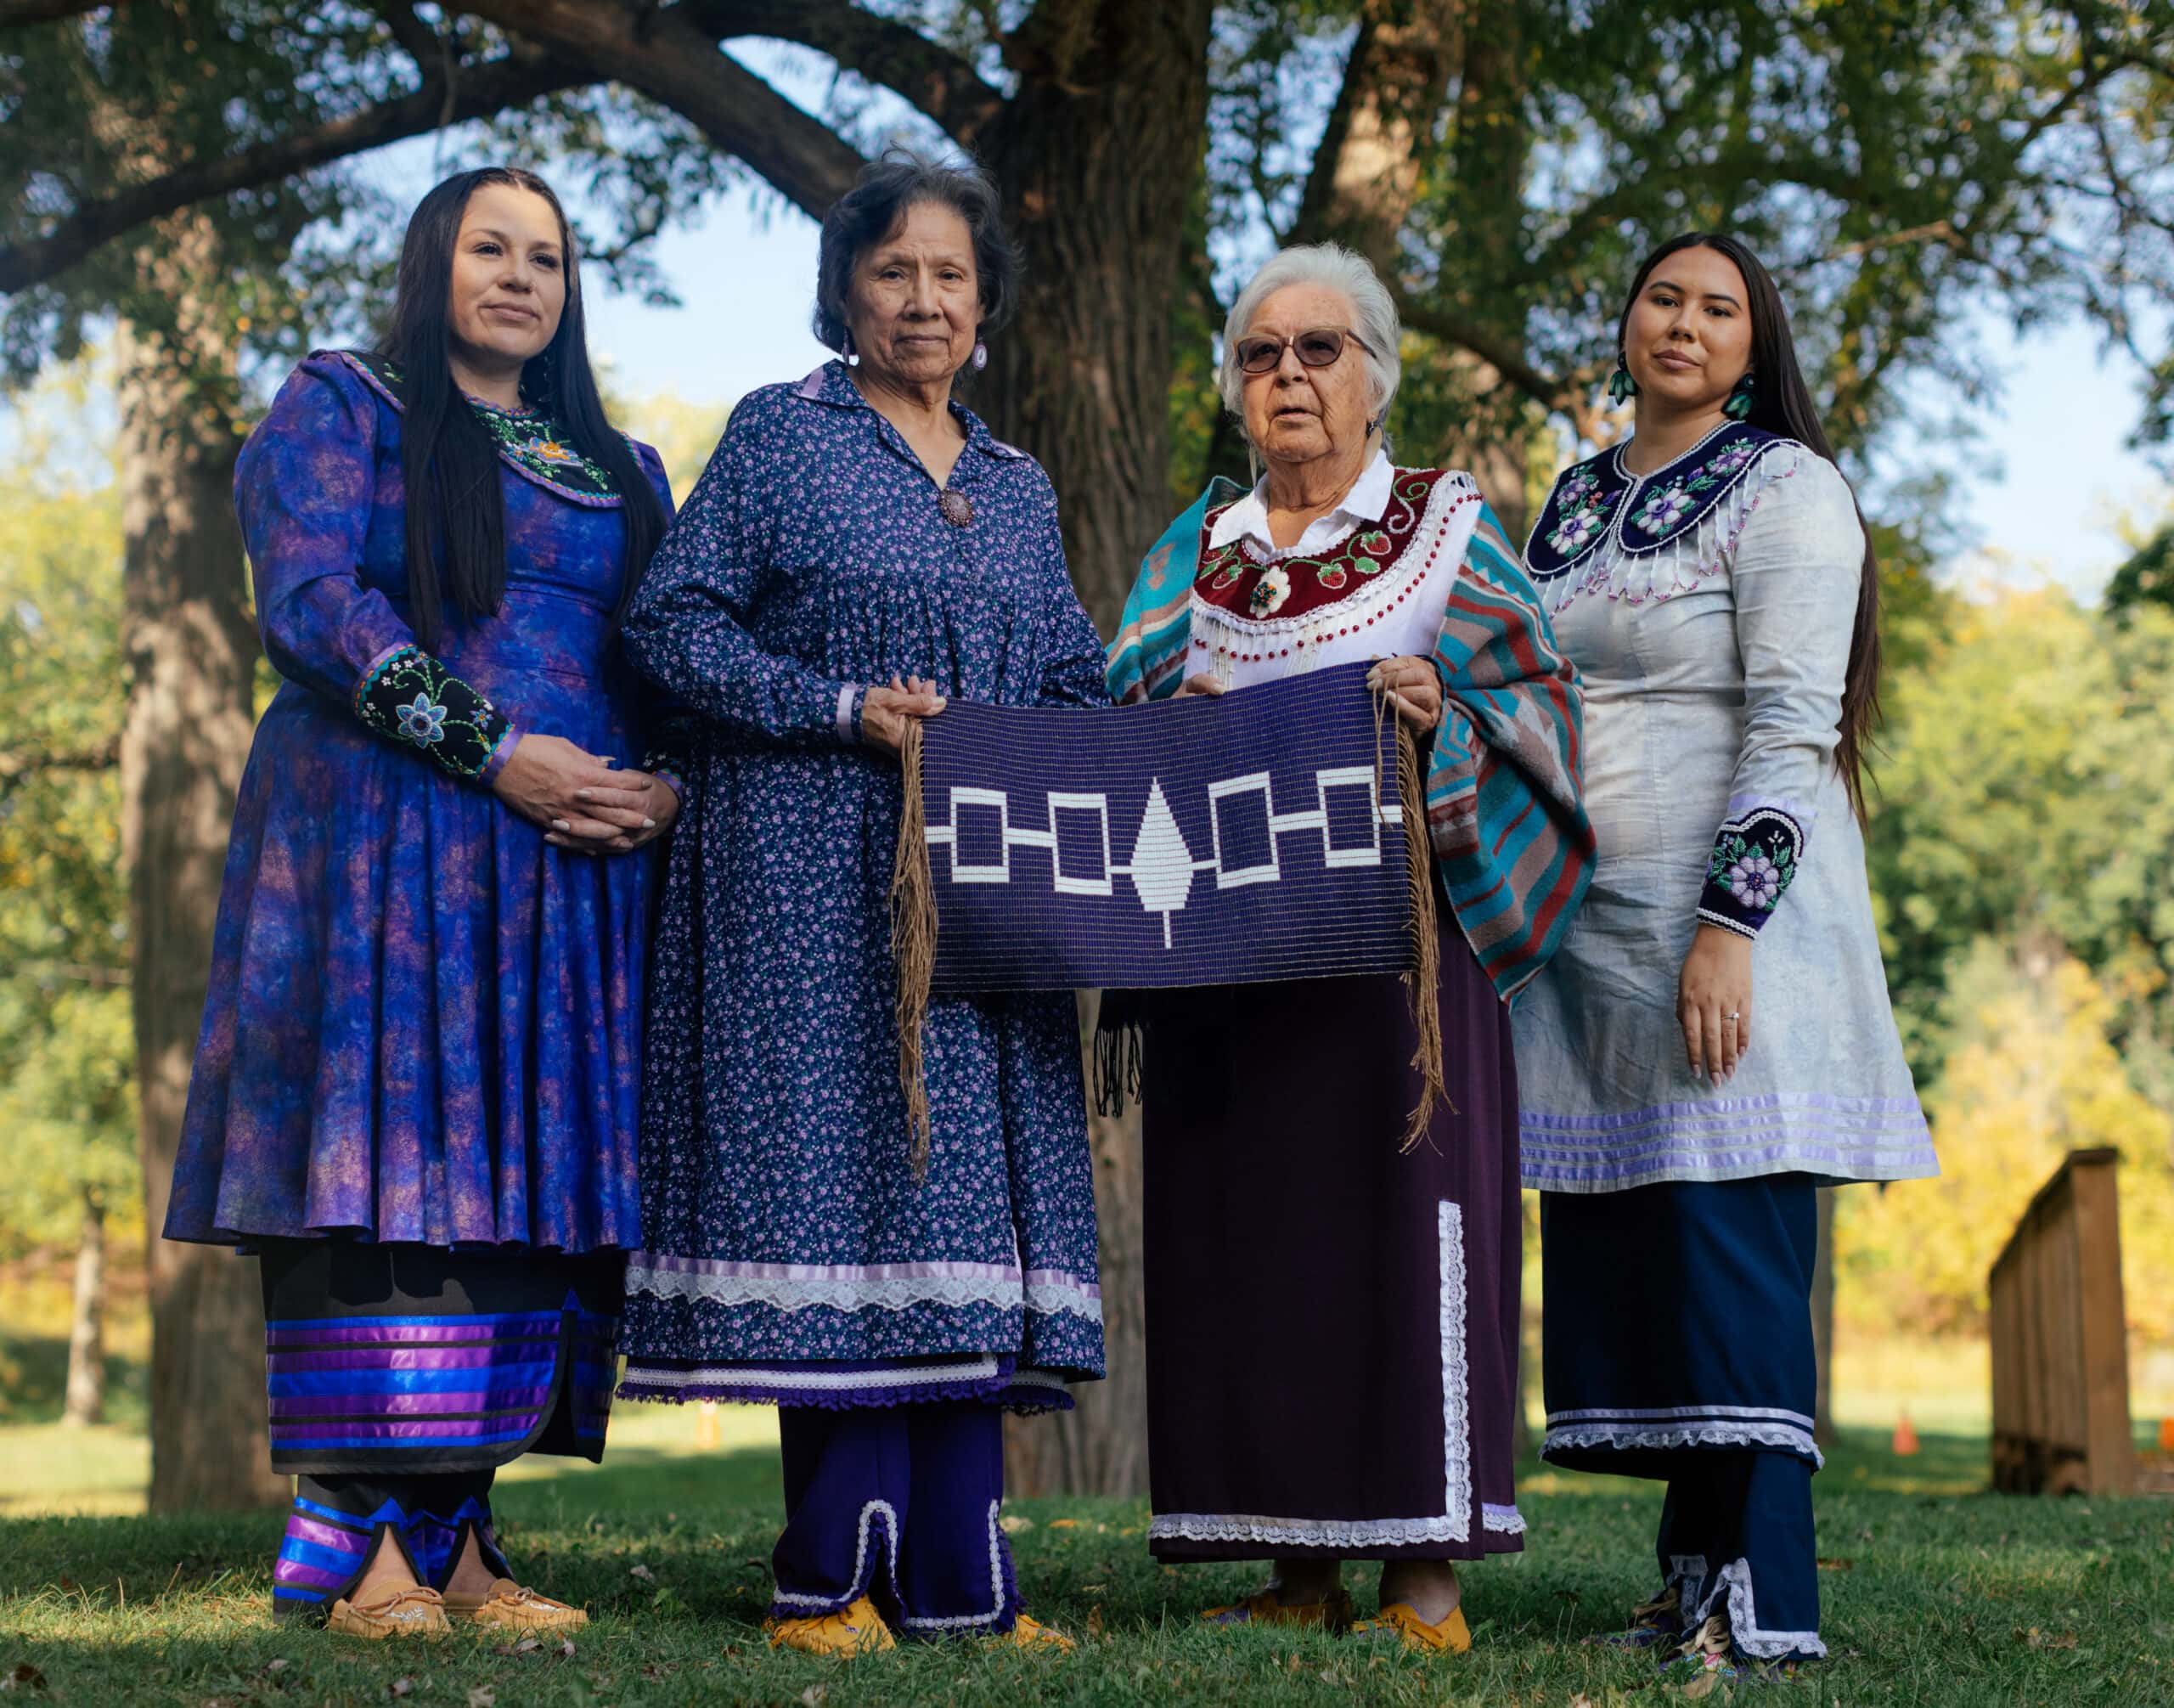 Four Haudenosaunee women of varying ages wearing purple and white hold a beaded belt. On the belt are four white rectangles connected together with a white tree in the centre, which is also connected to the rectangles.